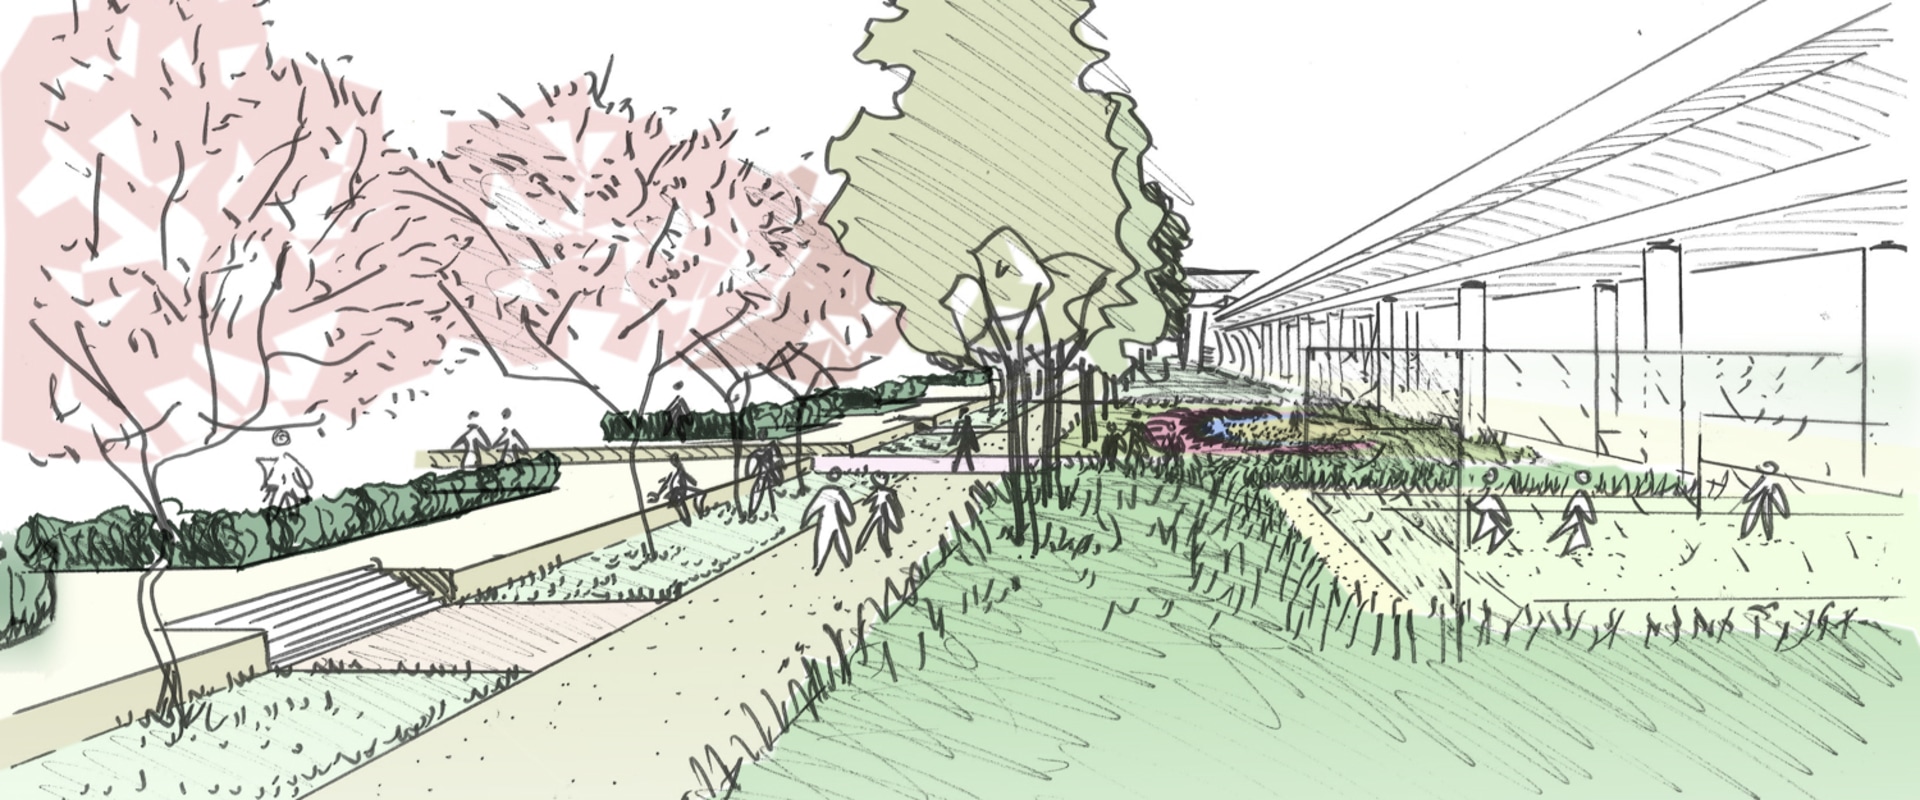 What is the main idea of becoming a landscape architect?